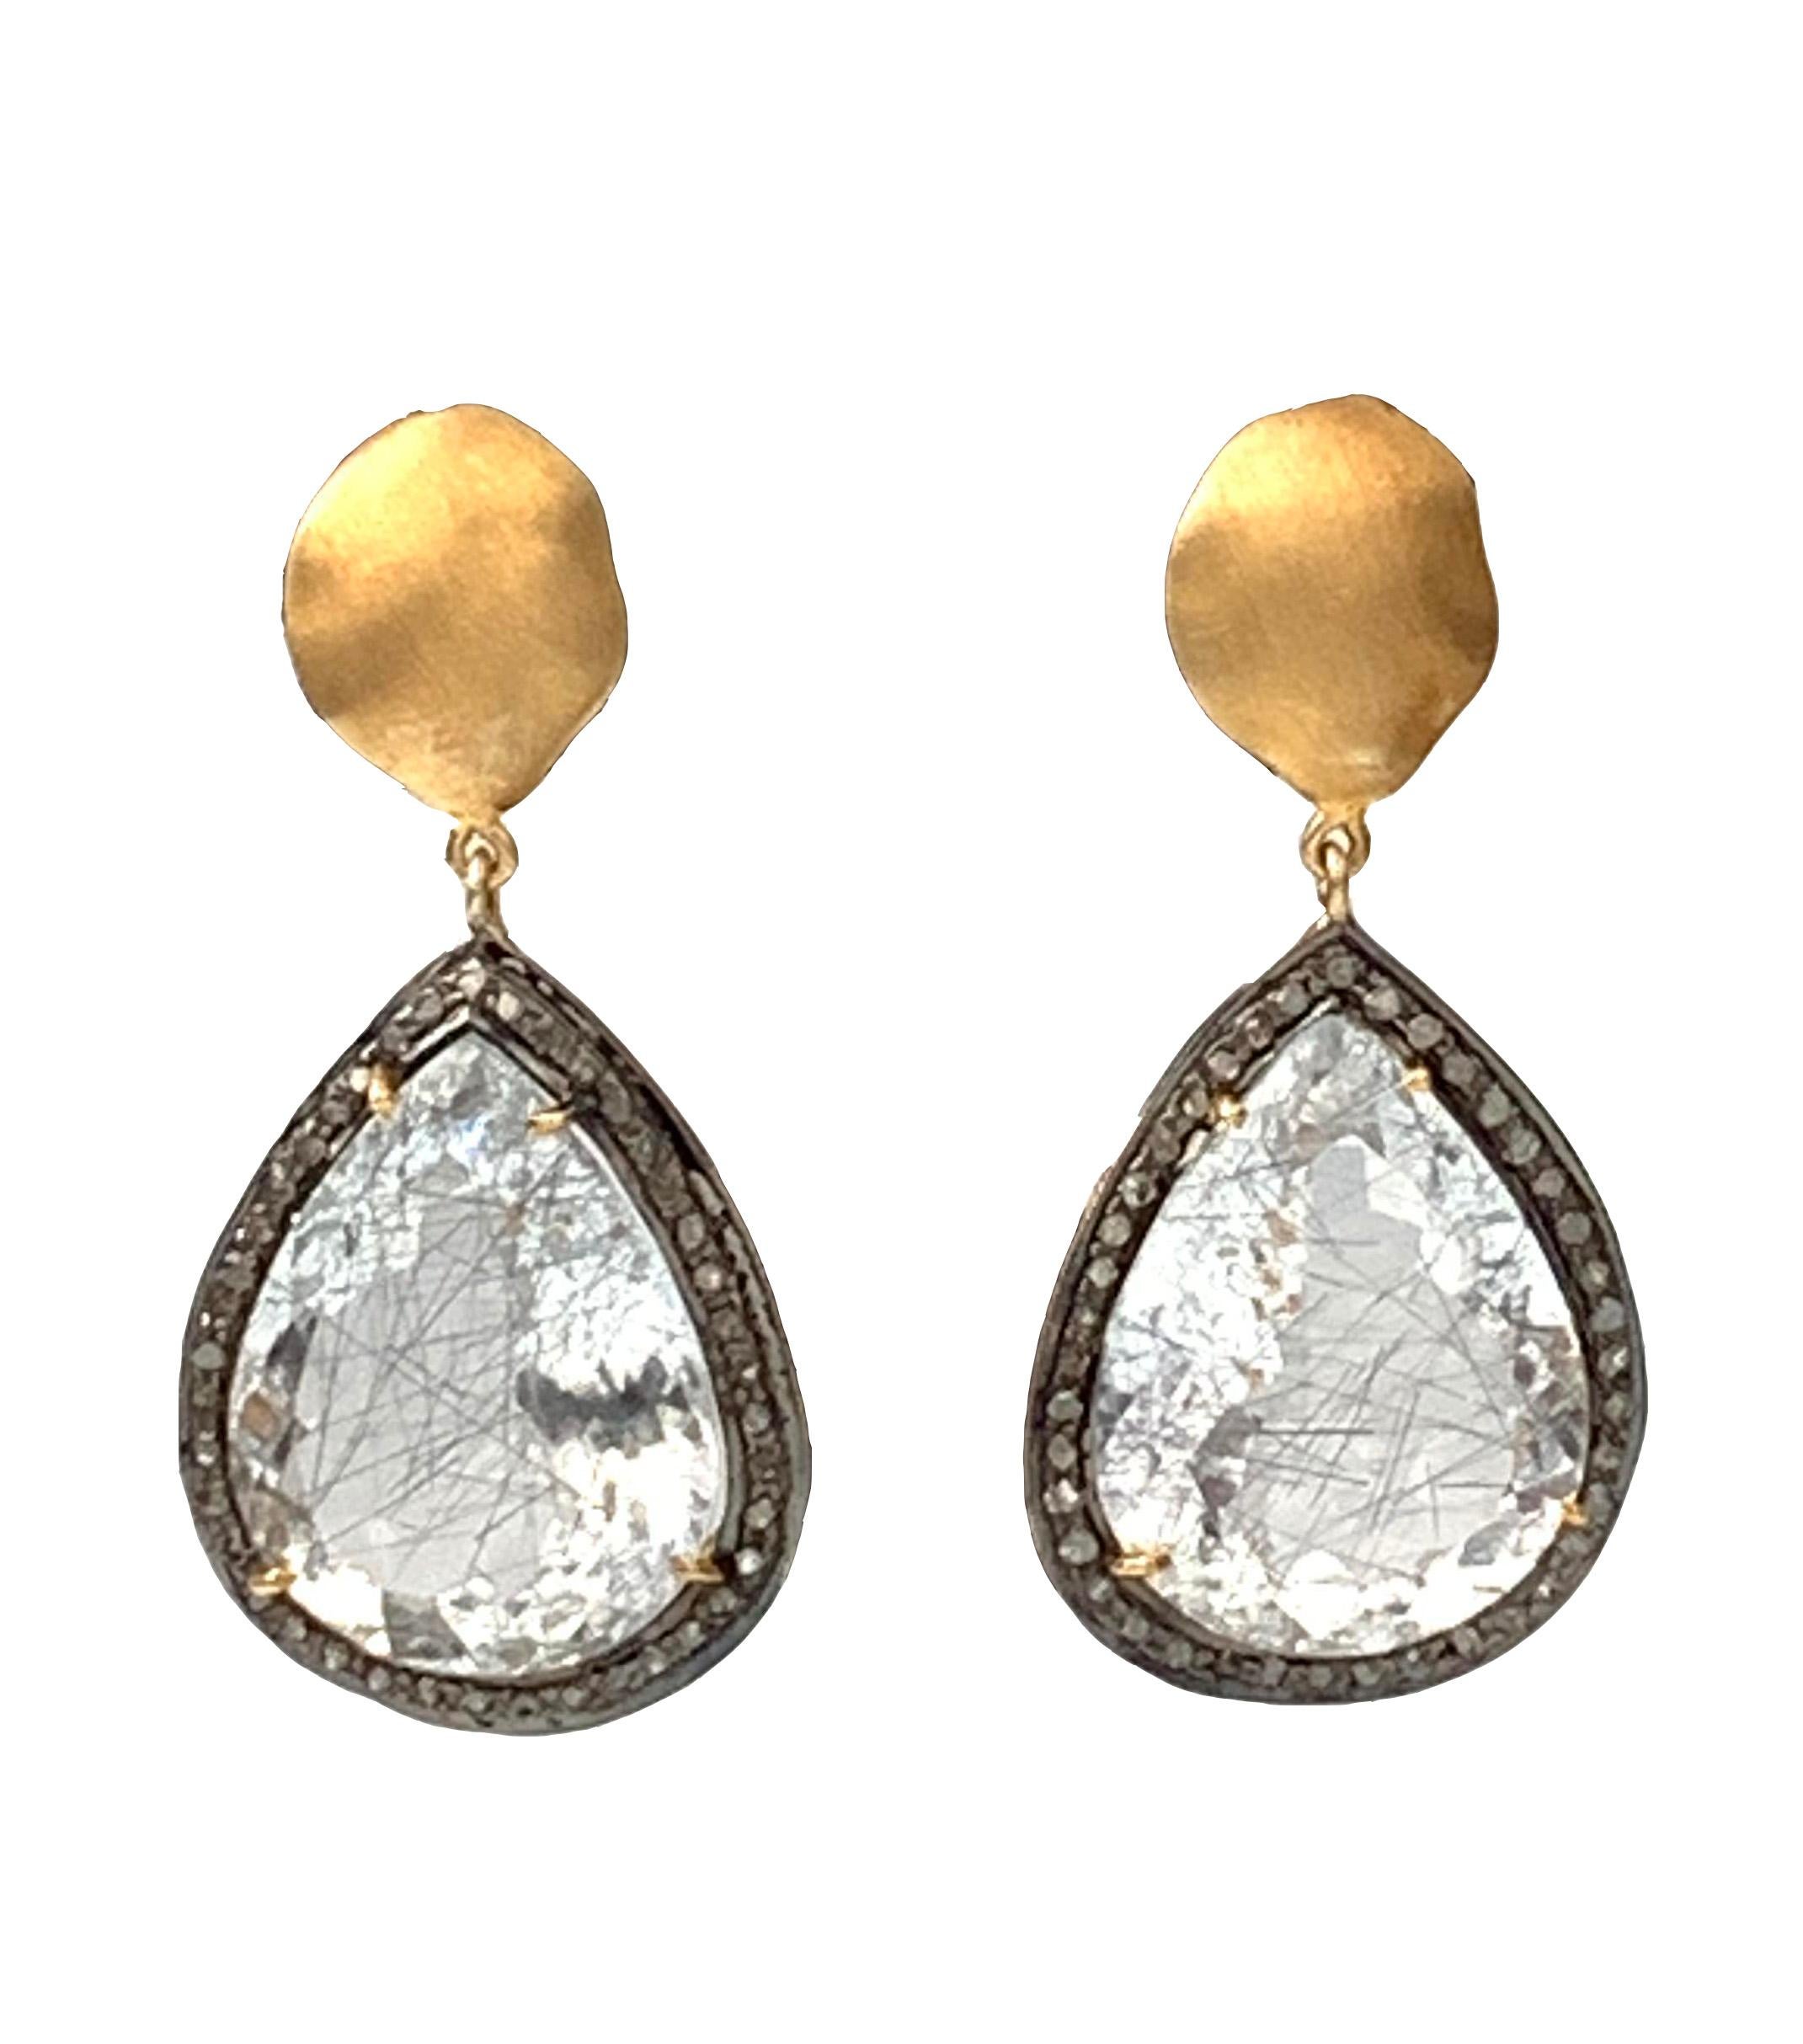 Beautiful One of a Kind Pear-shape Rutilated Quartz with Rough Diamond Drop Earrings. The top part is brushed satin finished showing matte looking. Bottom part is Pear shape Fine Rutilated Quartz is faceted cut, adorned with rough diamond, creating